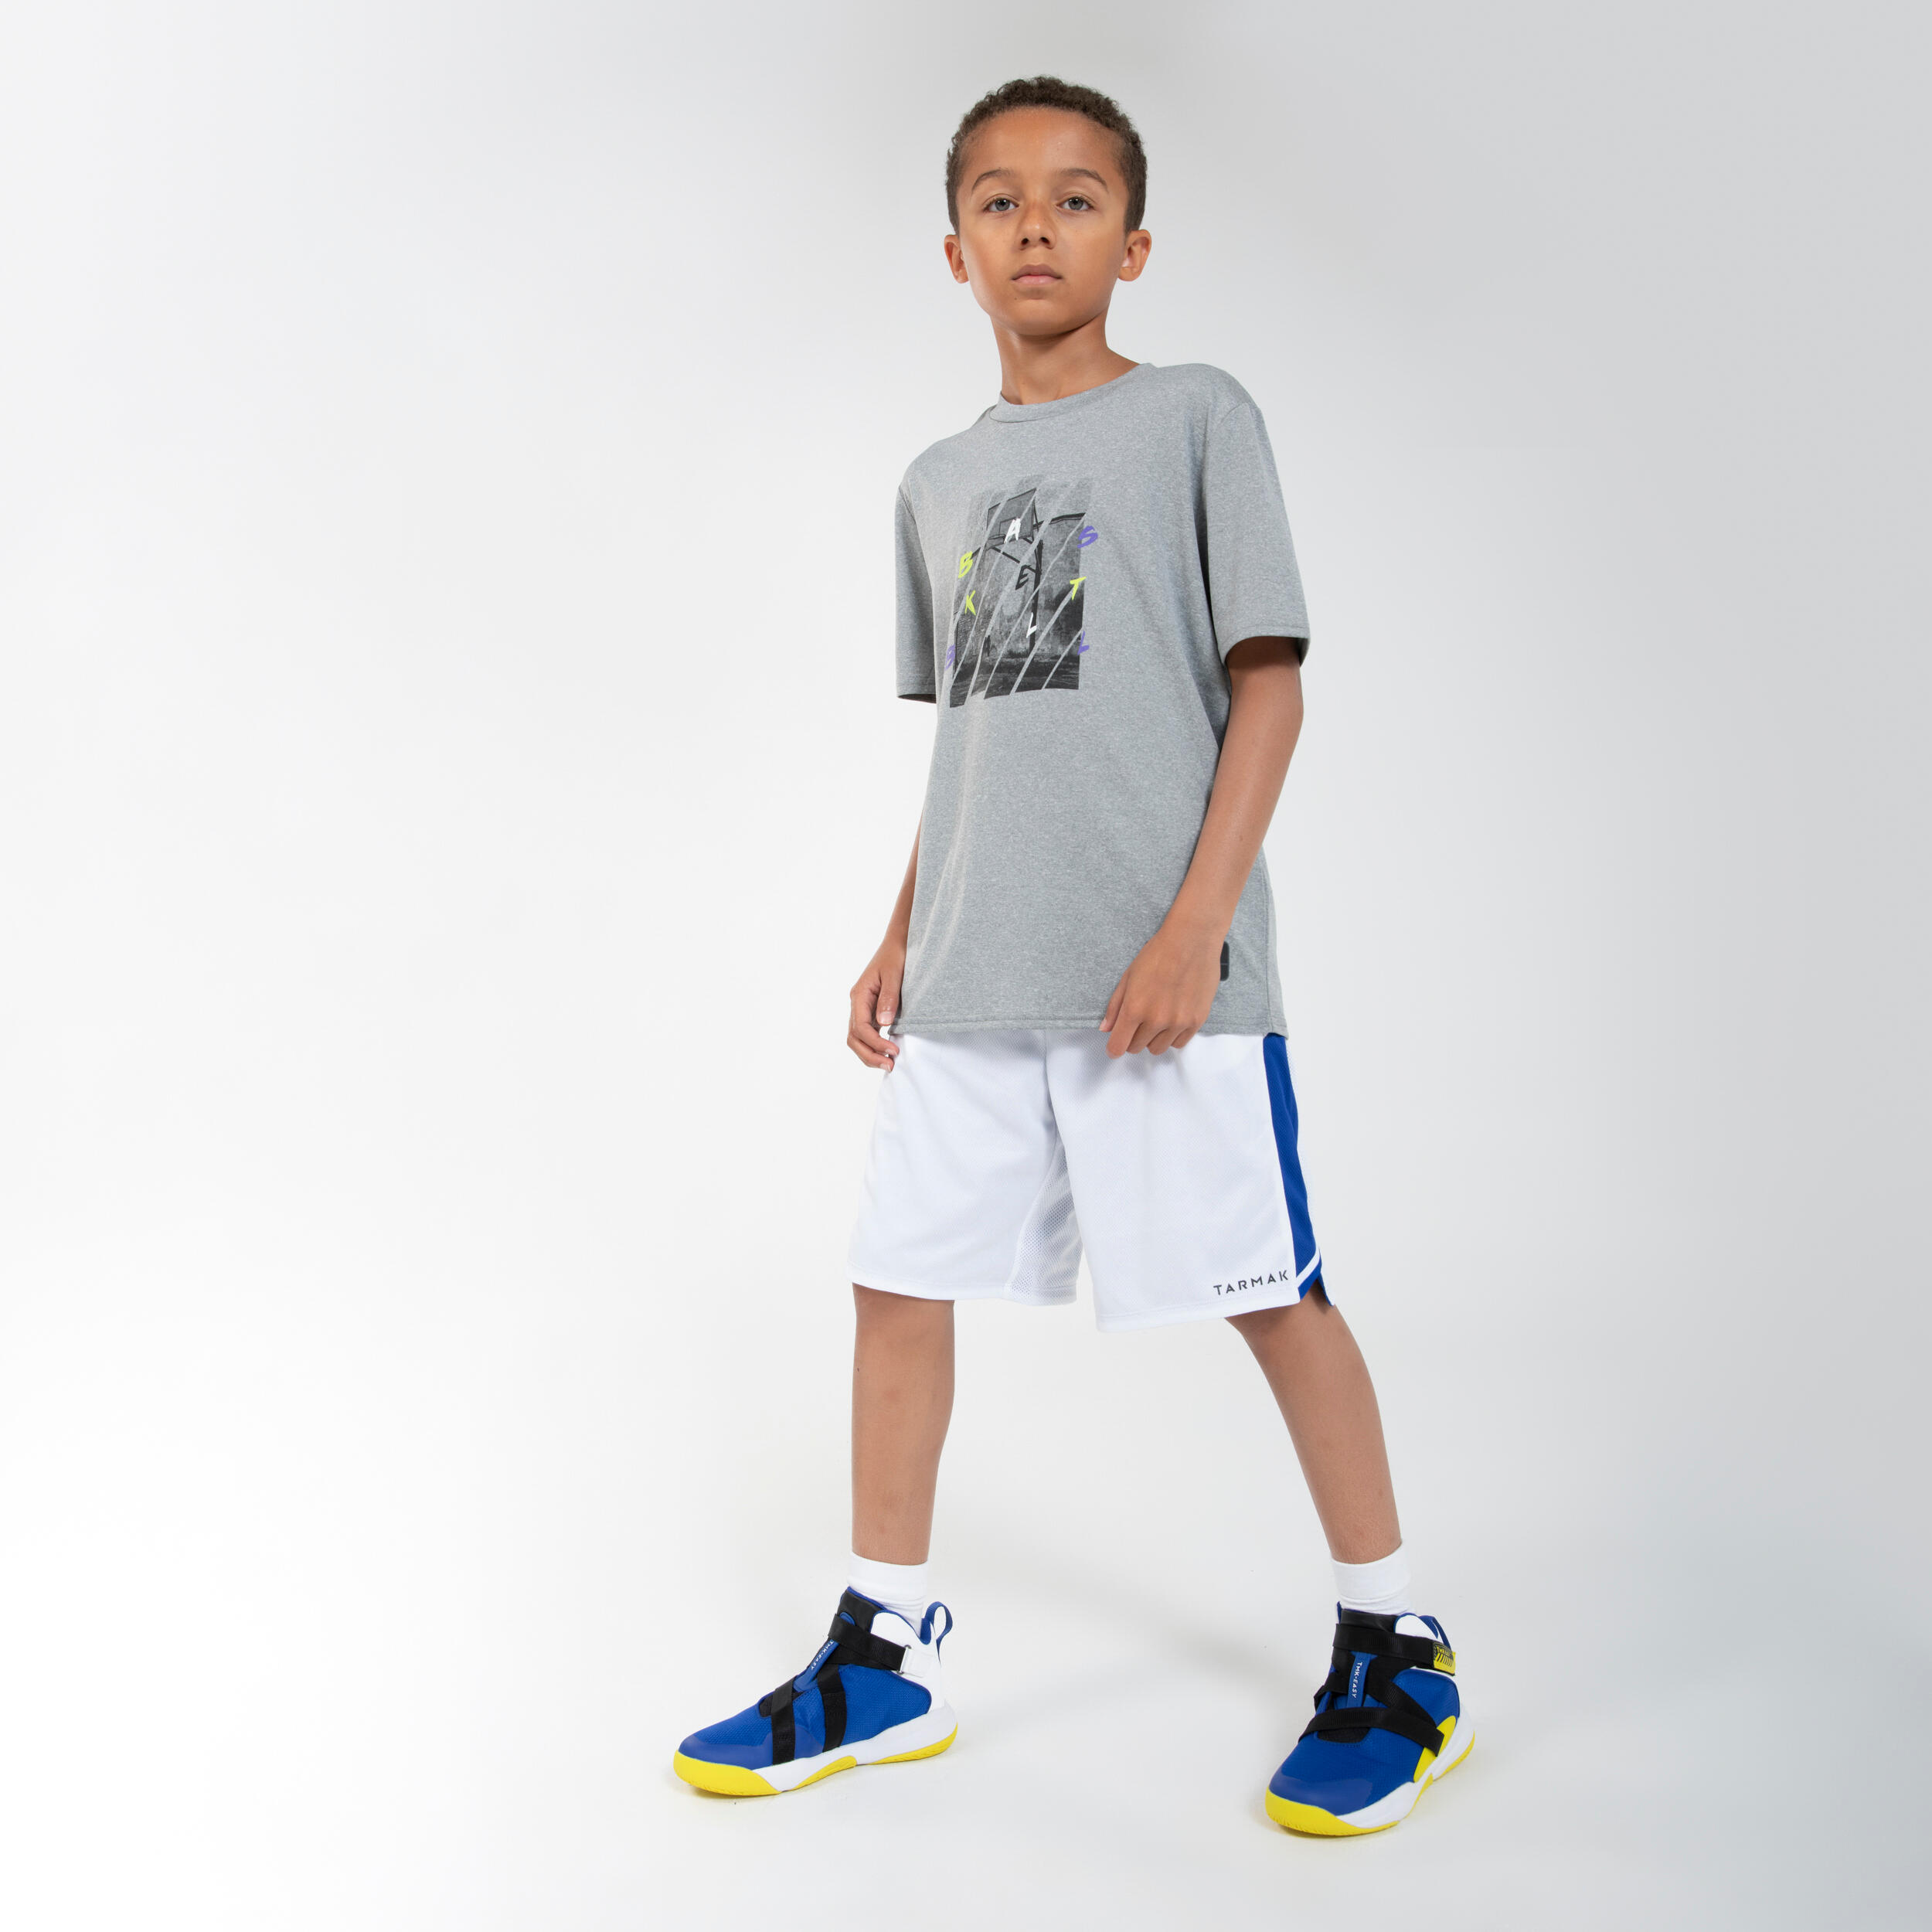 Kids' Basketball Shoes Easy X - Blue/Yellow 6/8